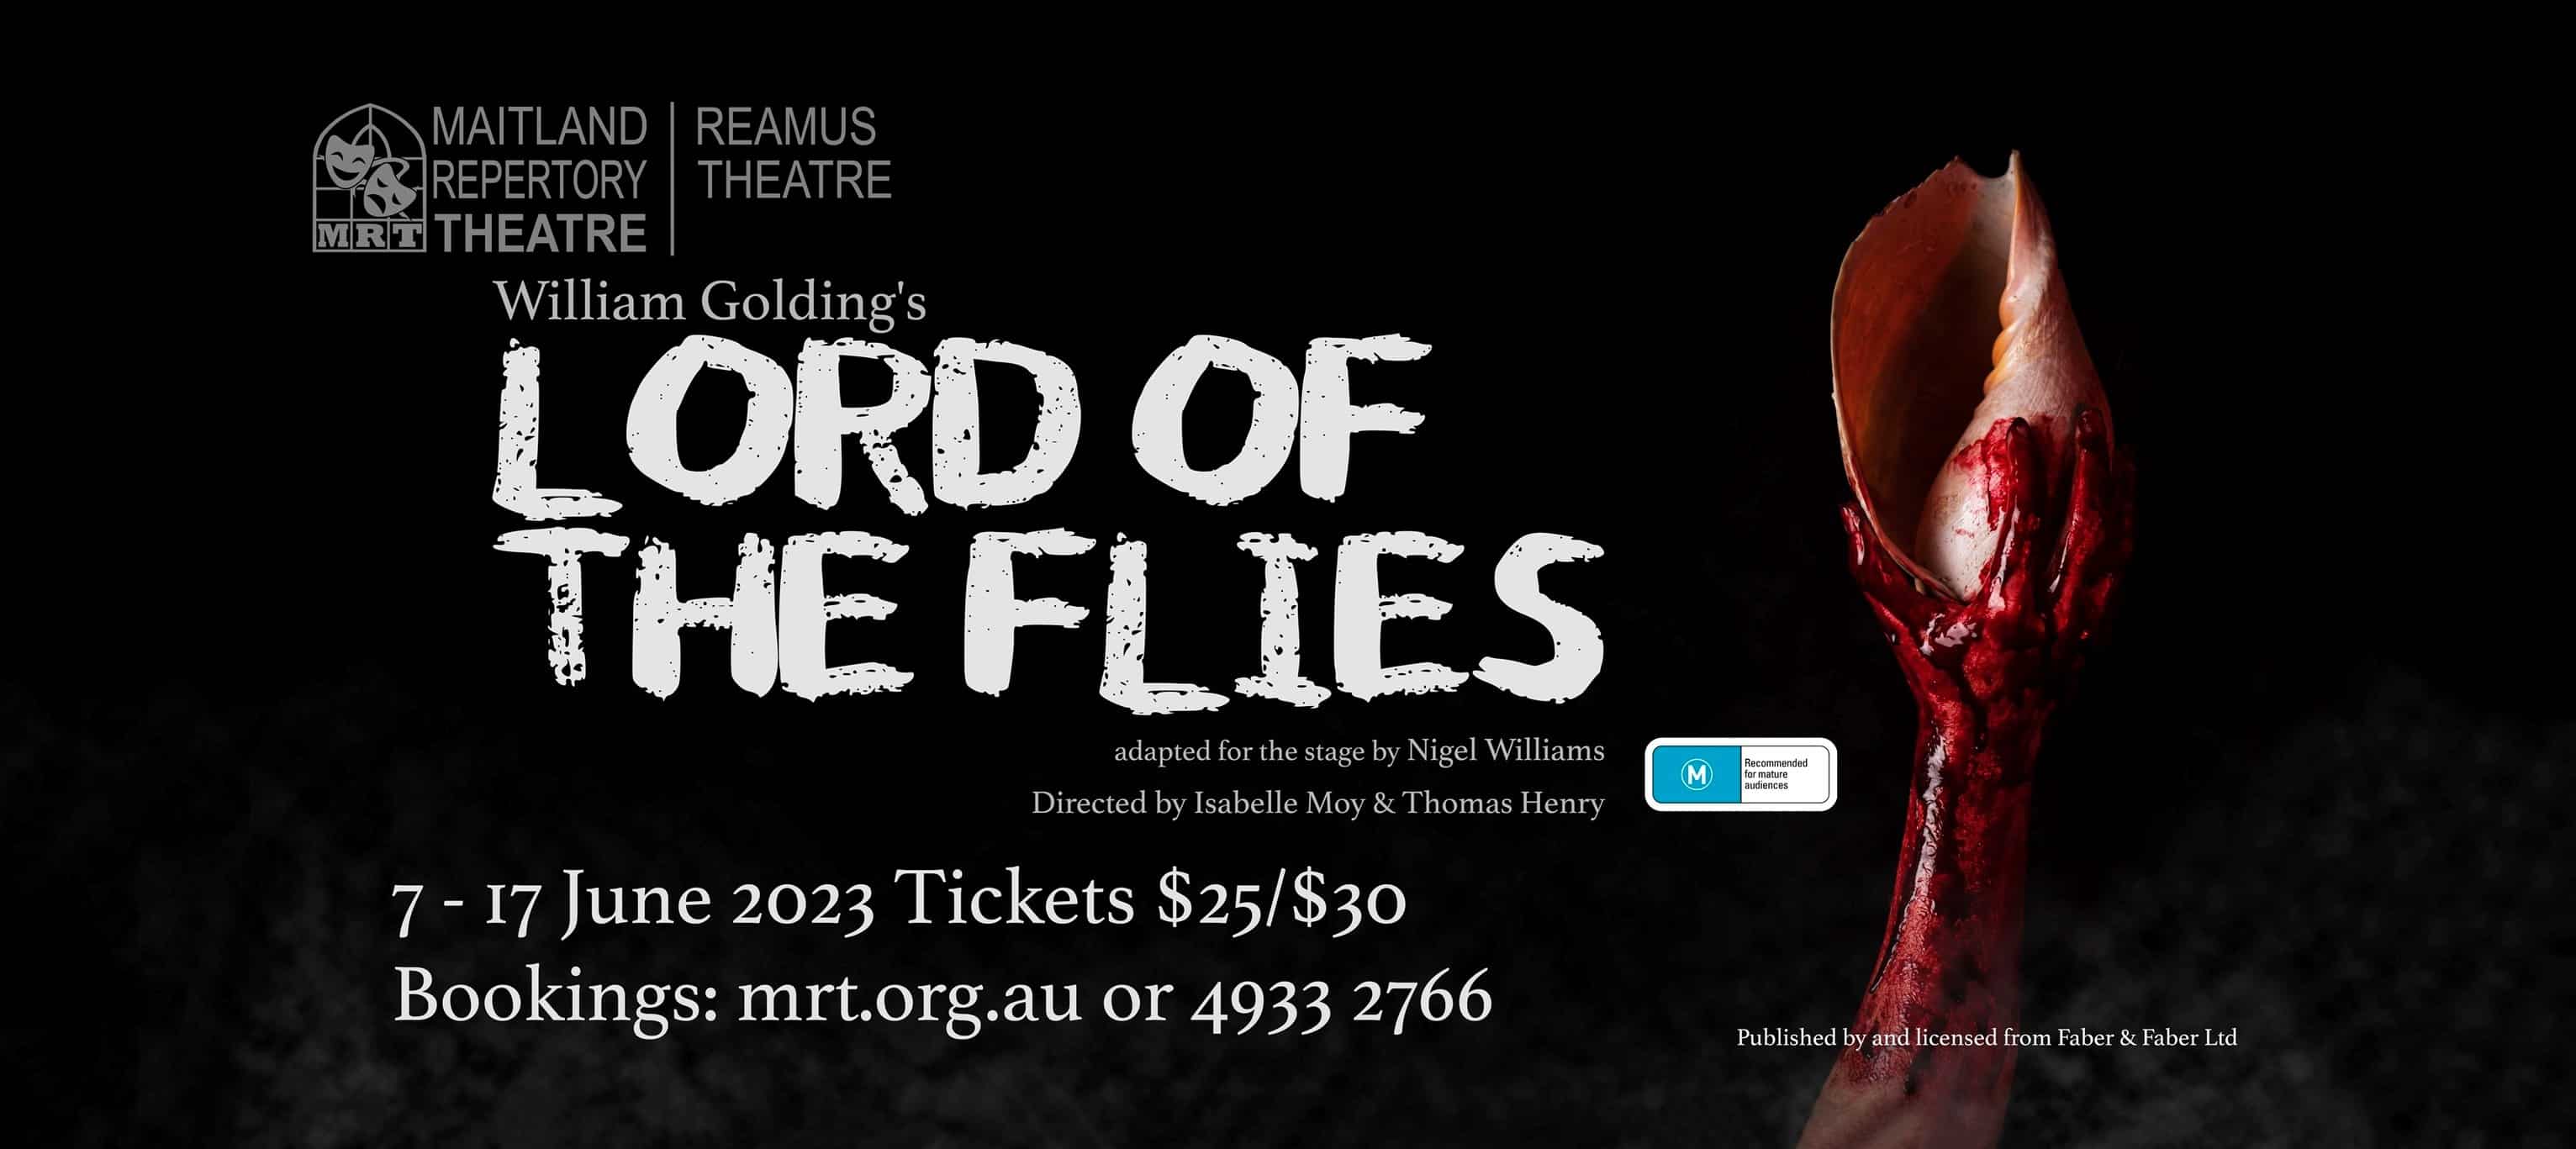 Lord of the Flies Rules Maitland